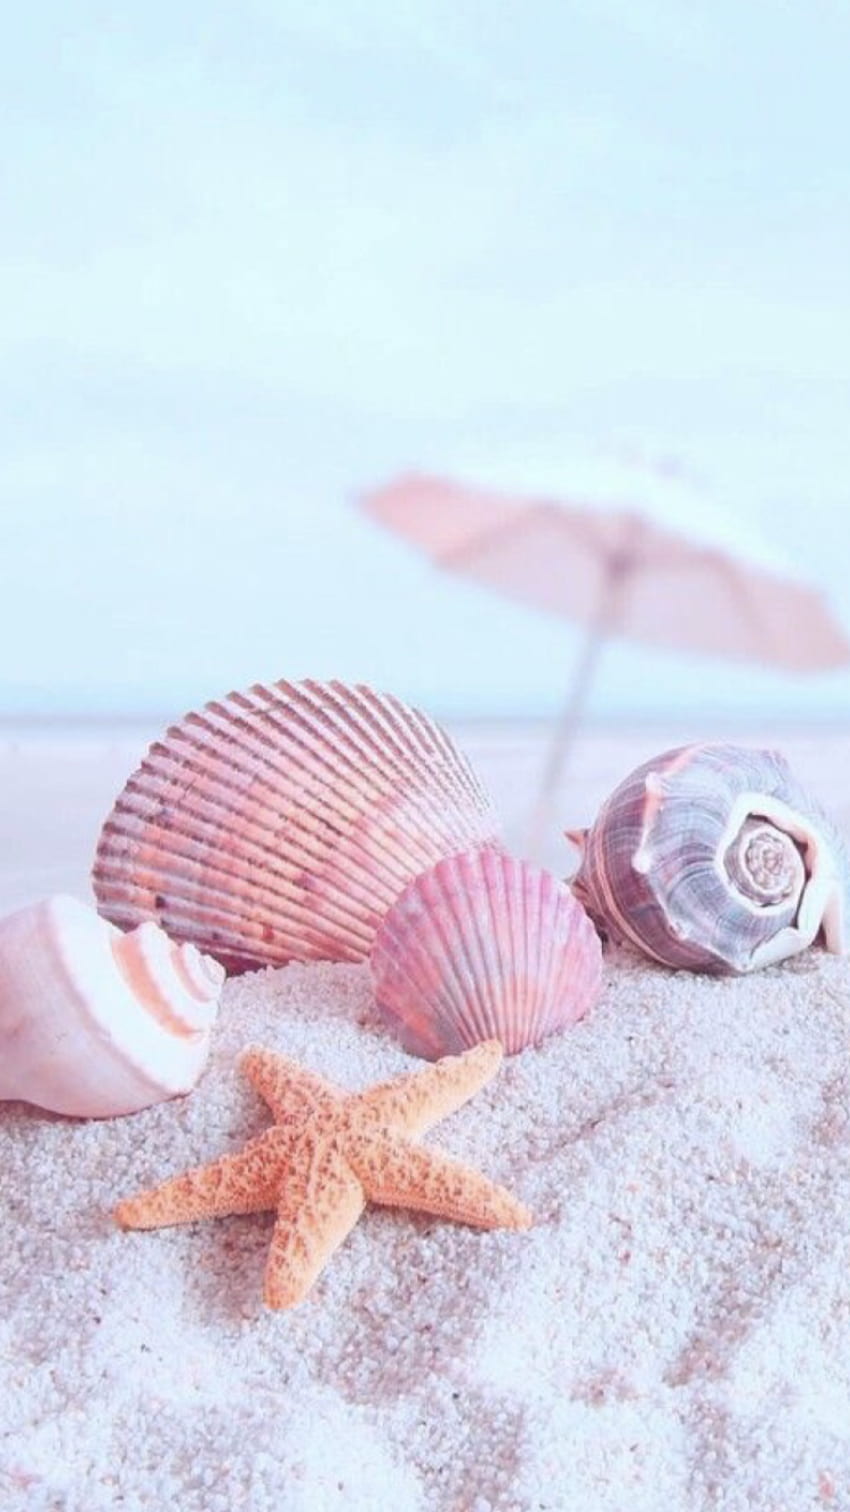 A collection of pink seashells and starfish on a white sandy beach - Starfish